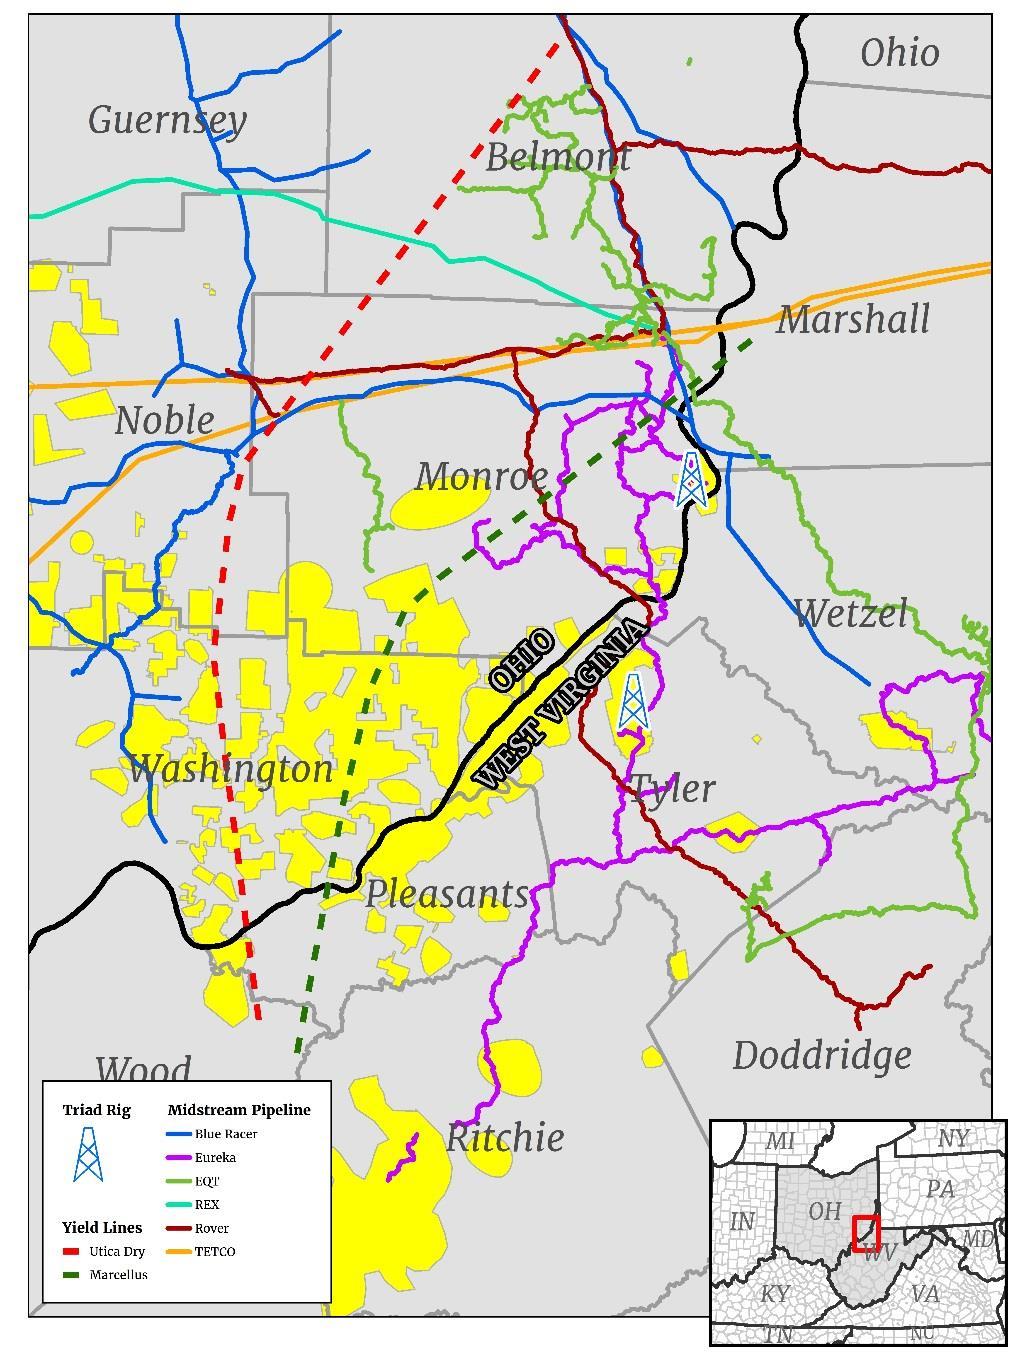 Blue Ridge Mountain Resources Pure play Utica and Marcellus Exploration & Production Company Production 60 mmscfe/d 79% Natural Gas Activity (Dec 31 st ) 2 Operated Rigs 2 Non-operated Rigs Proved